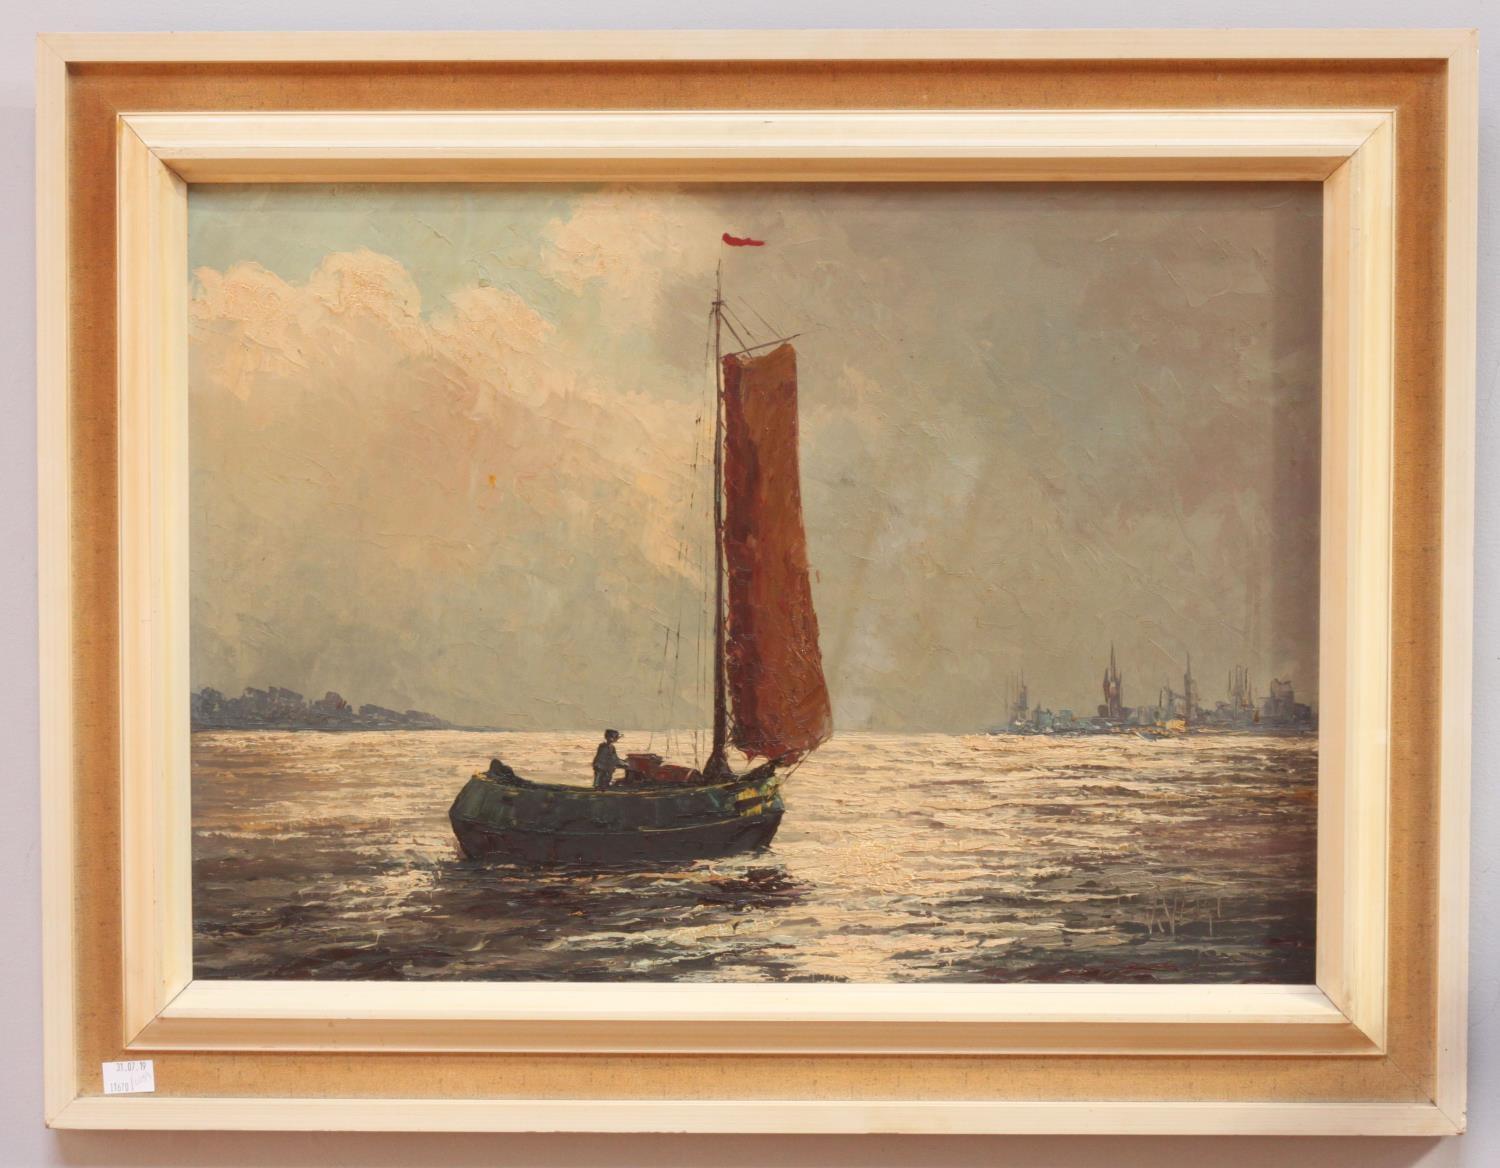 V. Vegt (20th century) Seascape study with figure in boat and buildings beyond, signed, oil on